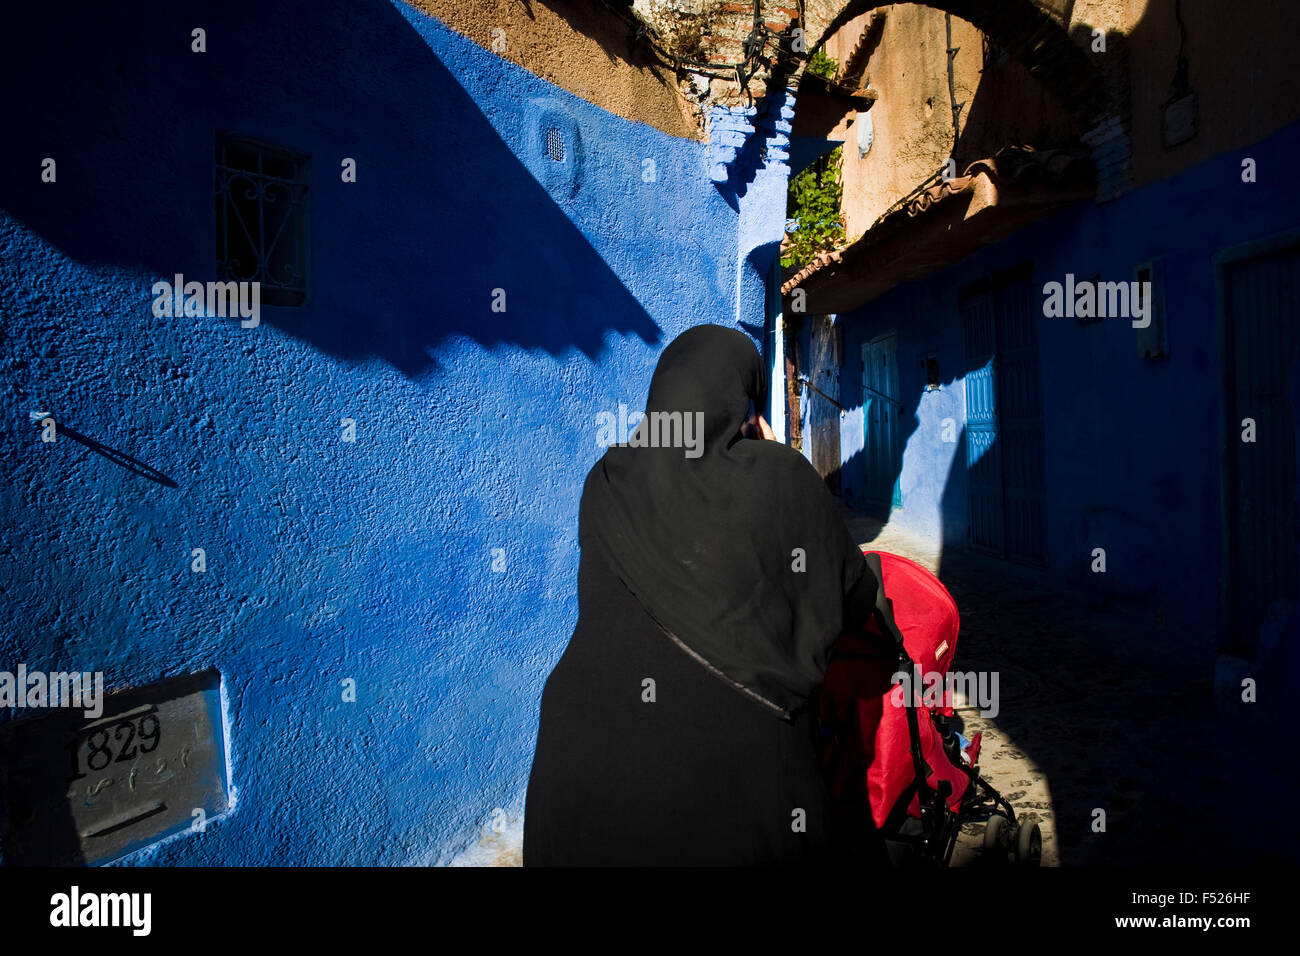 Morocco, Chefchaouen, daily life Stock Photo